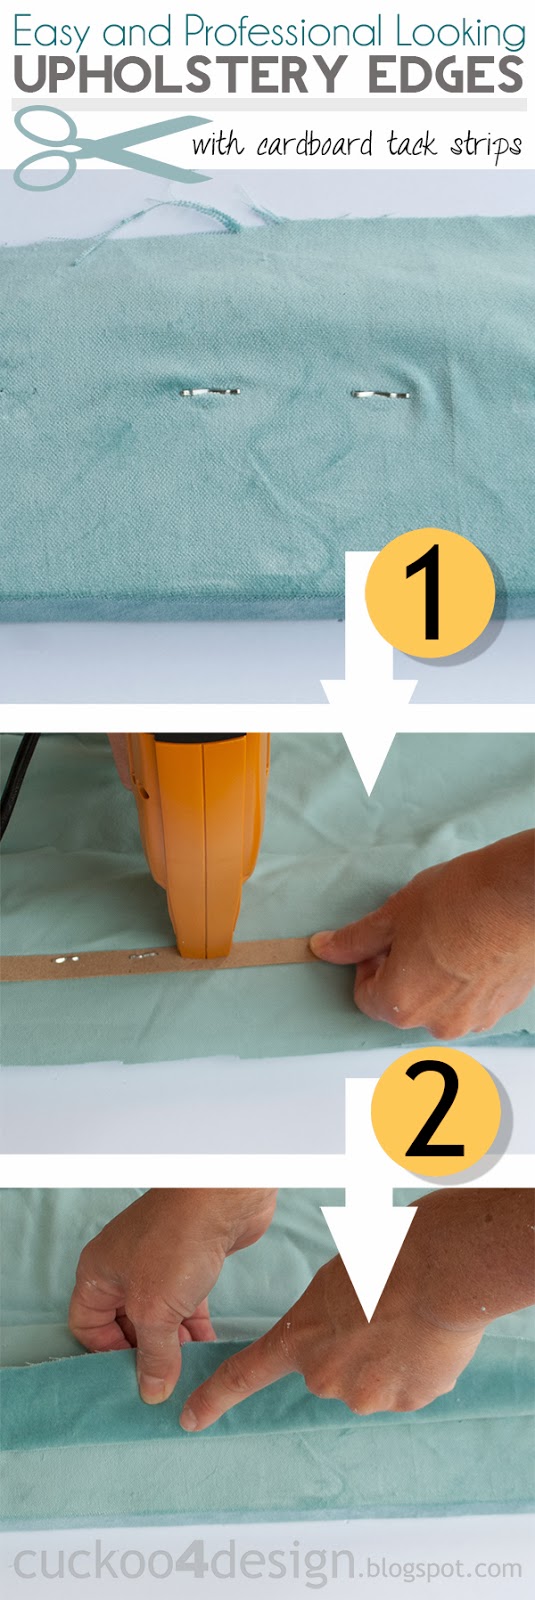 Easy and professional looking upholstery edges with cardboard tack strips for DIY fabric headboard